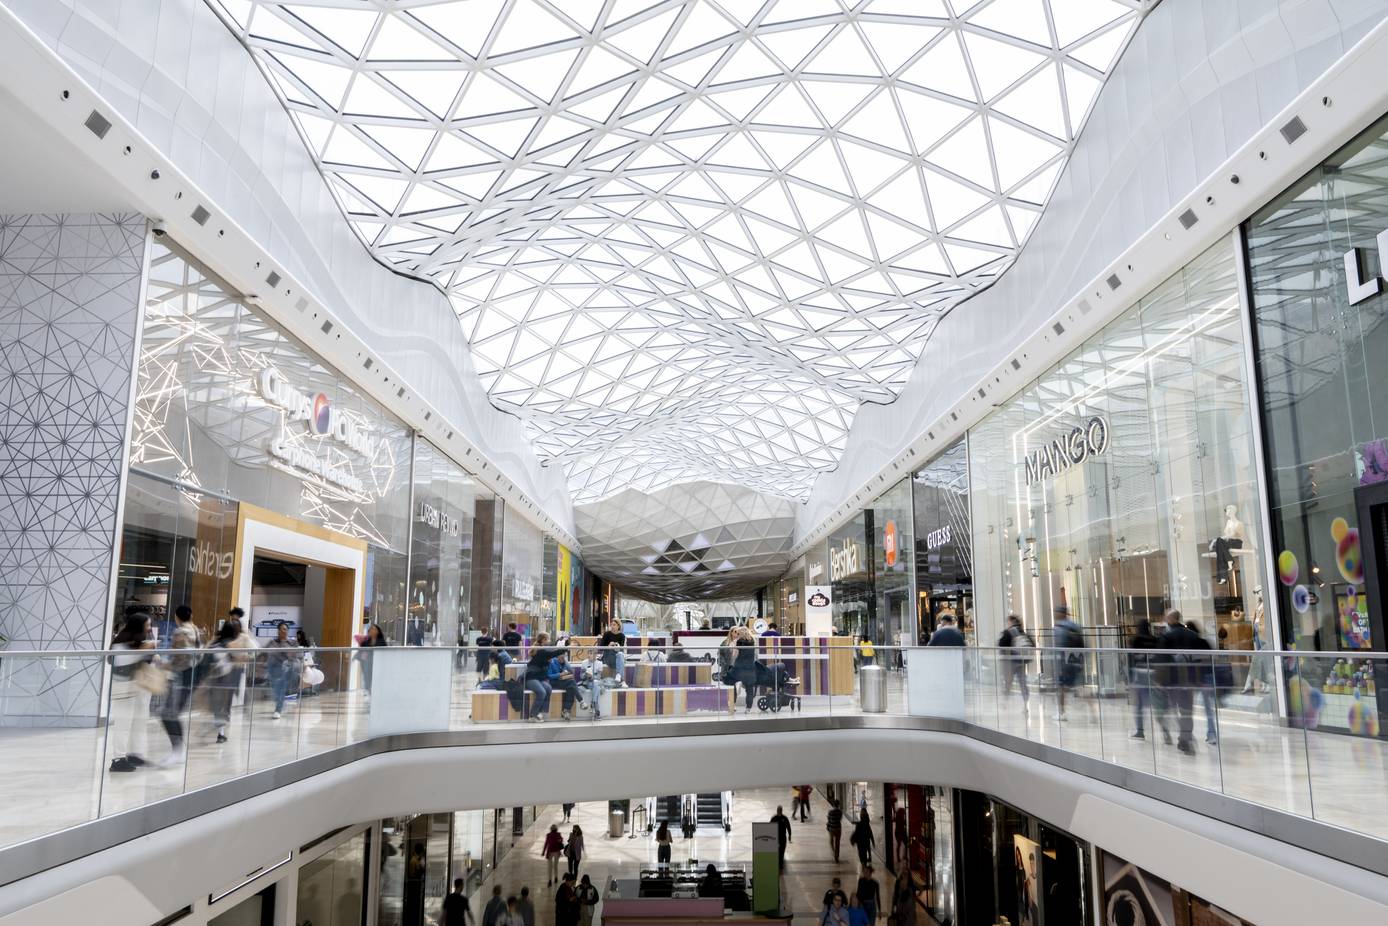 Westfield identifies trend for larger flagship stores as brands upsize